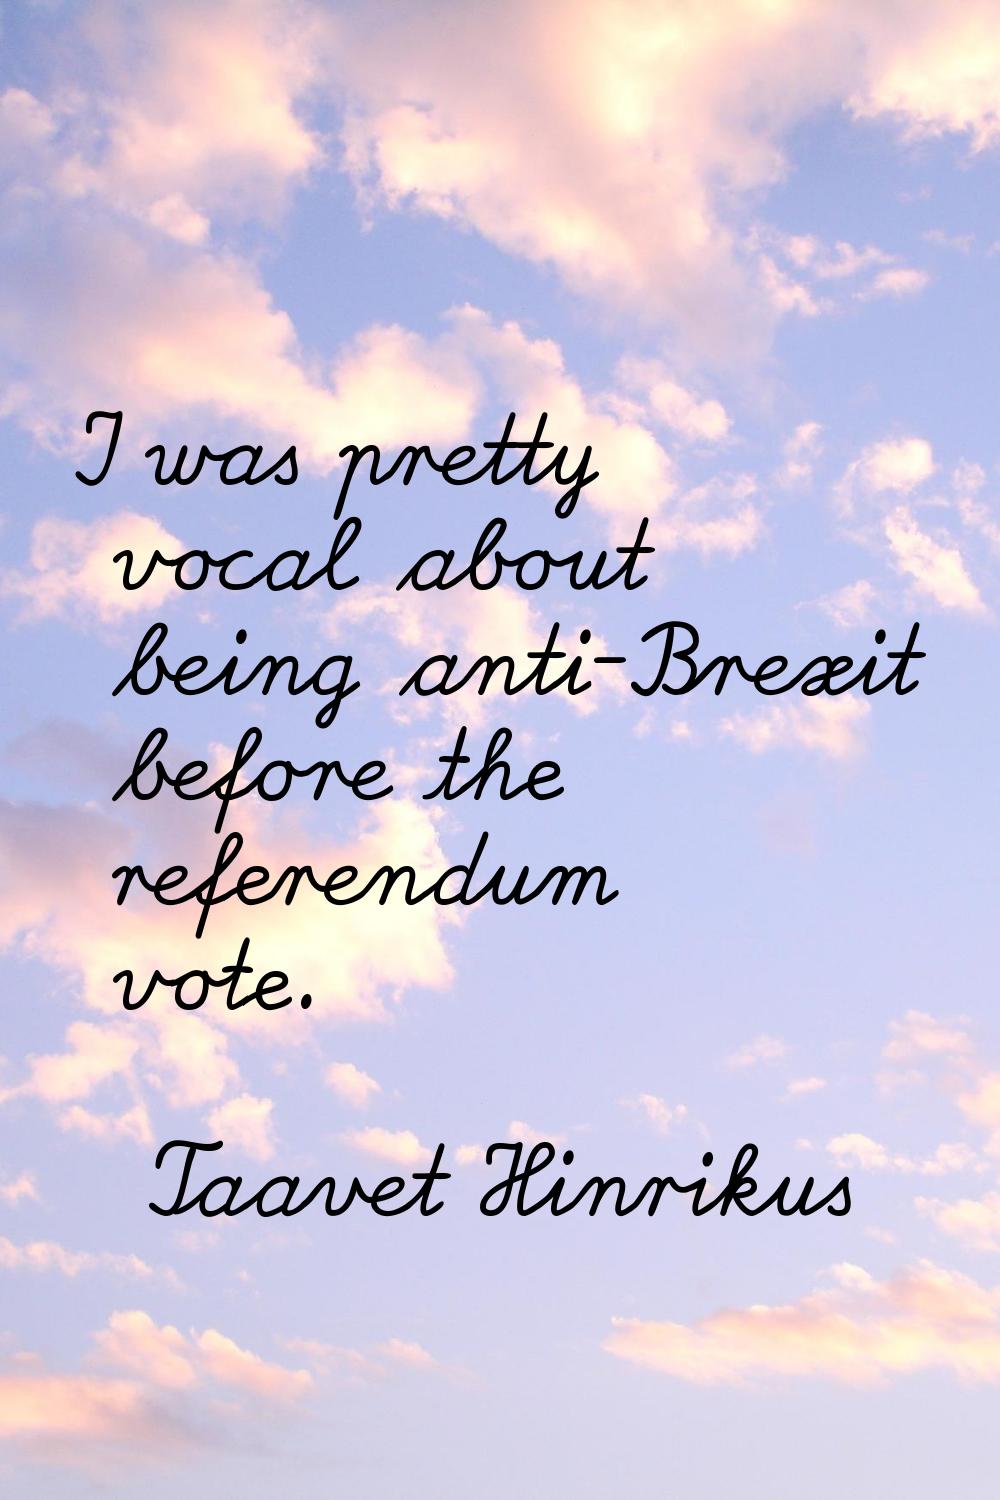 I was pretty vocal about being anti-Brexit before the referendum vote.